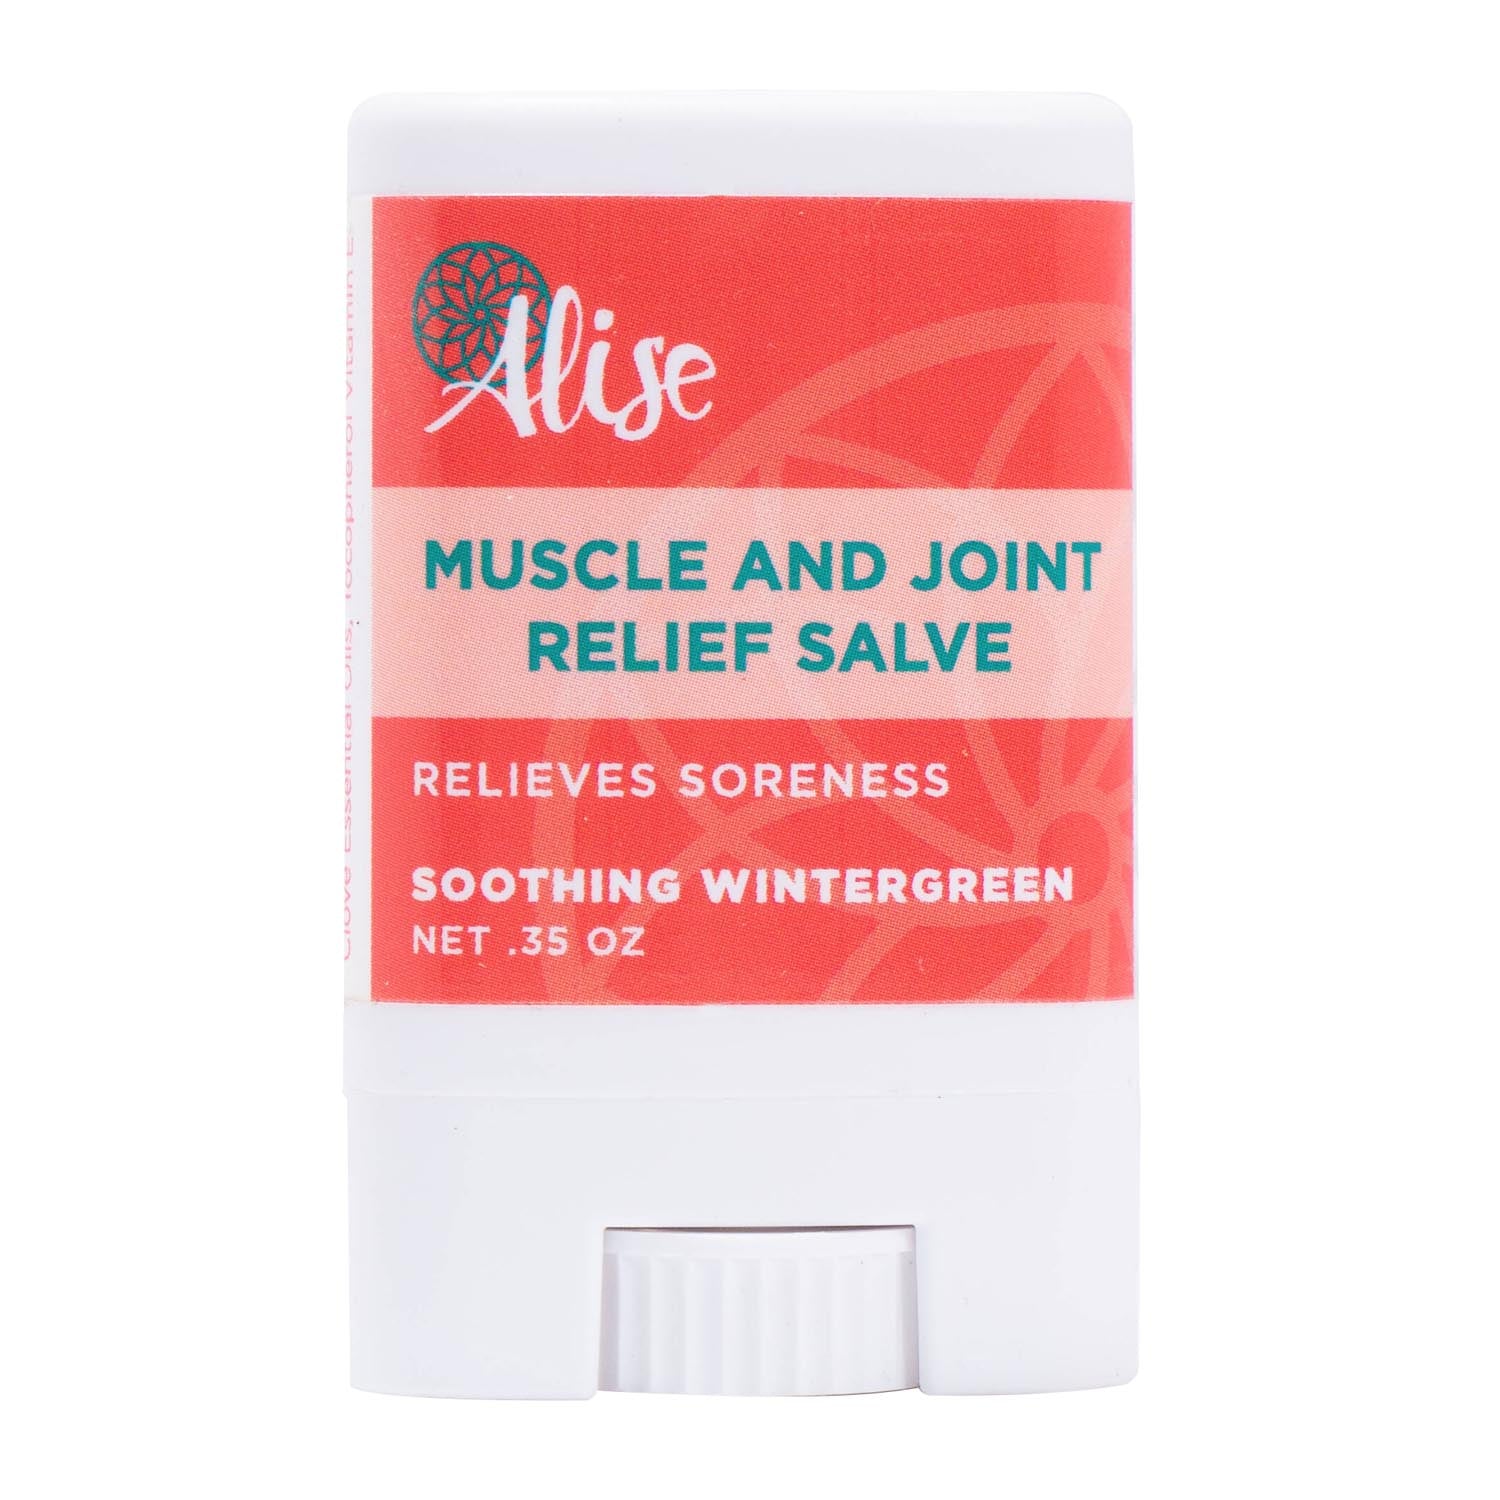 Muscle and Joint Relief Salve Wintergreen .35oz Rub On handcrafted by Alise Body Care